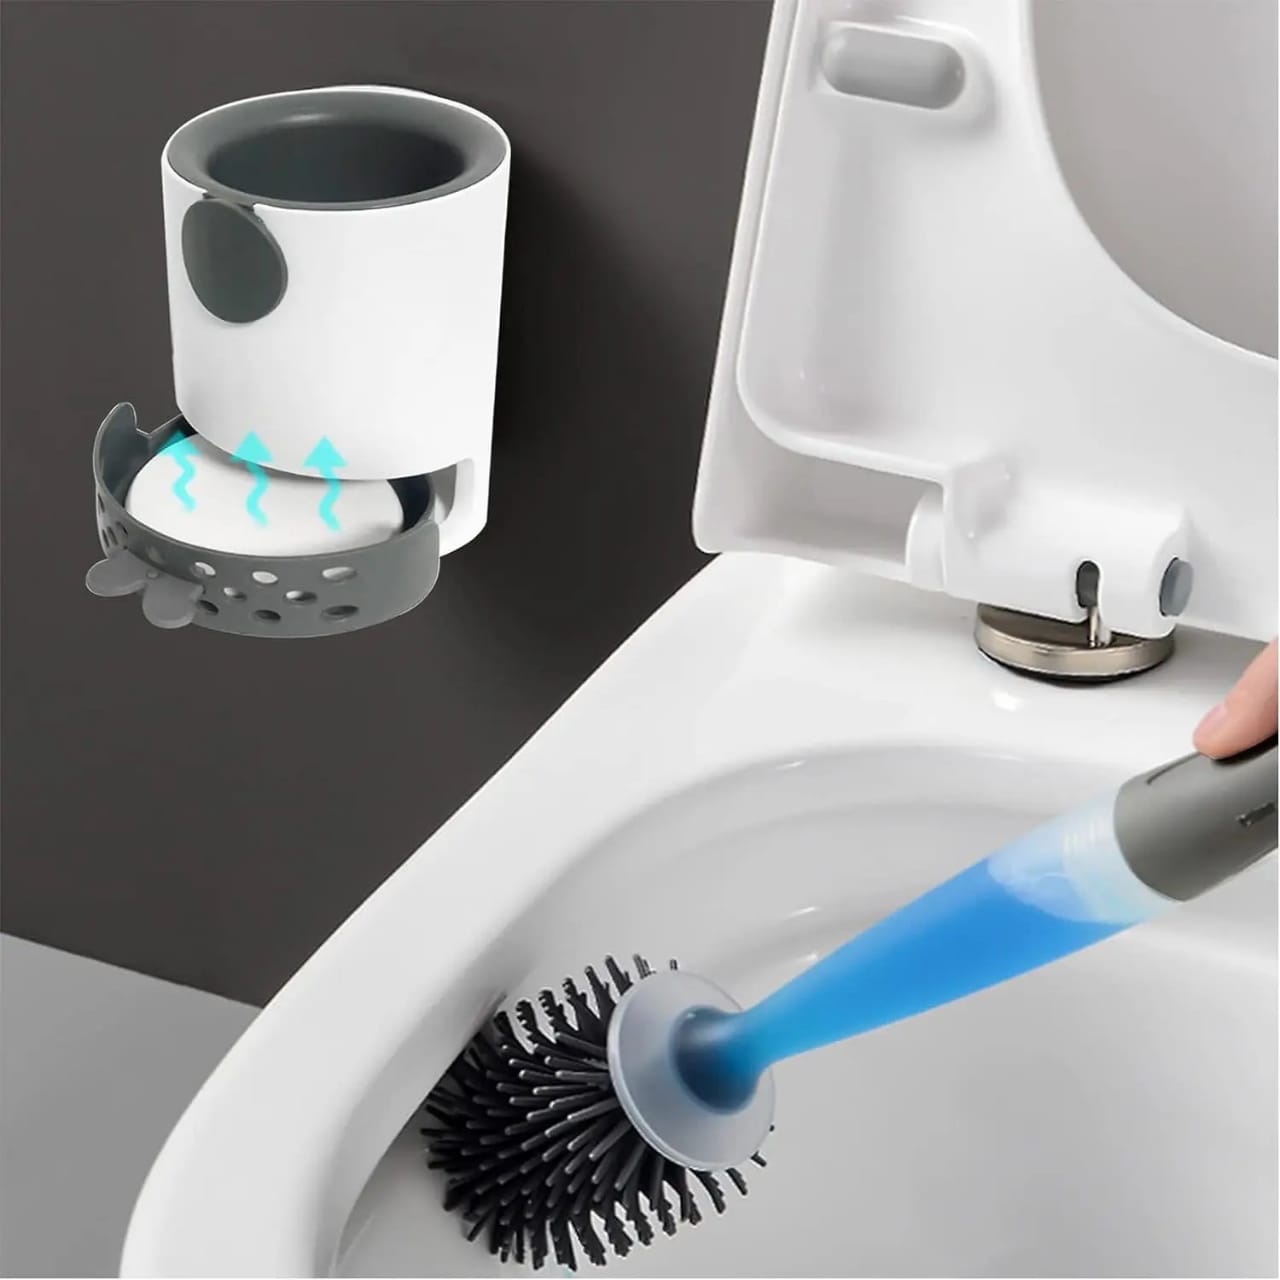 A Person is Cleaning Toilet Using Refillable Toilet Cleaning Brush.